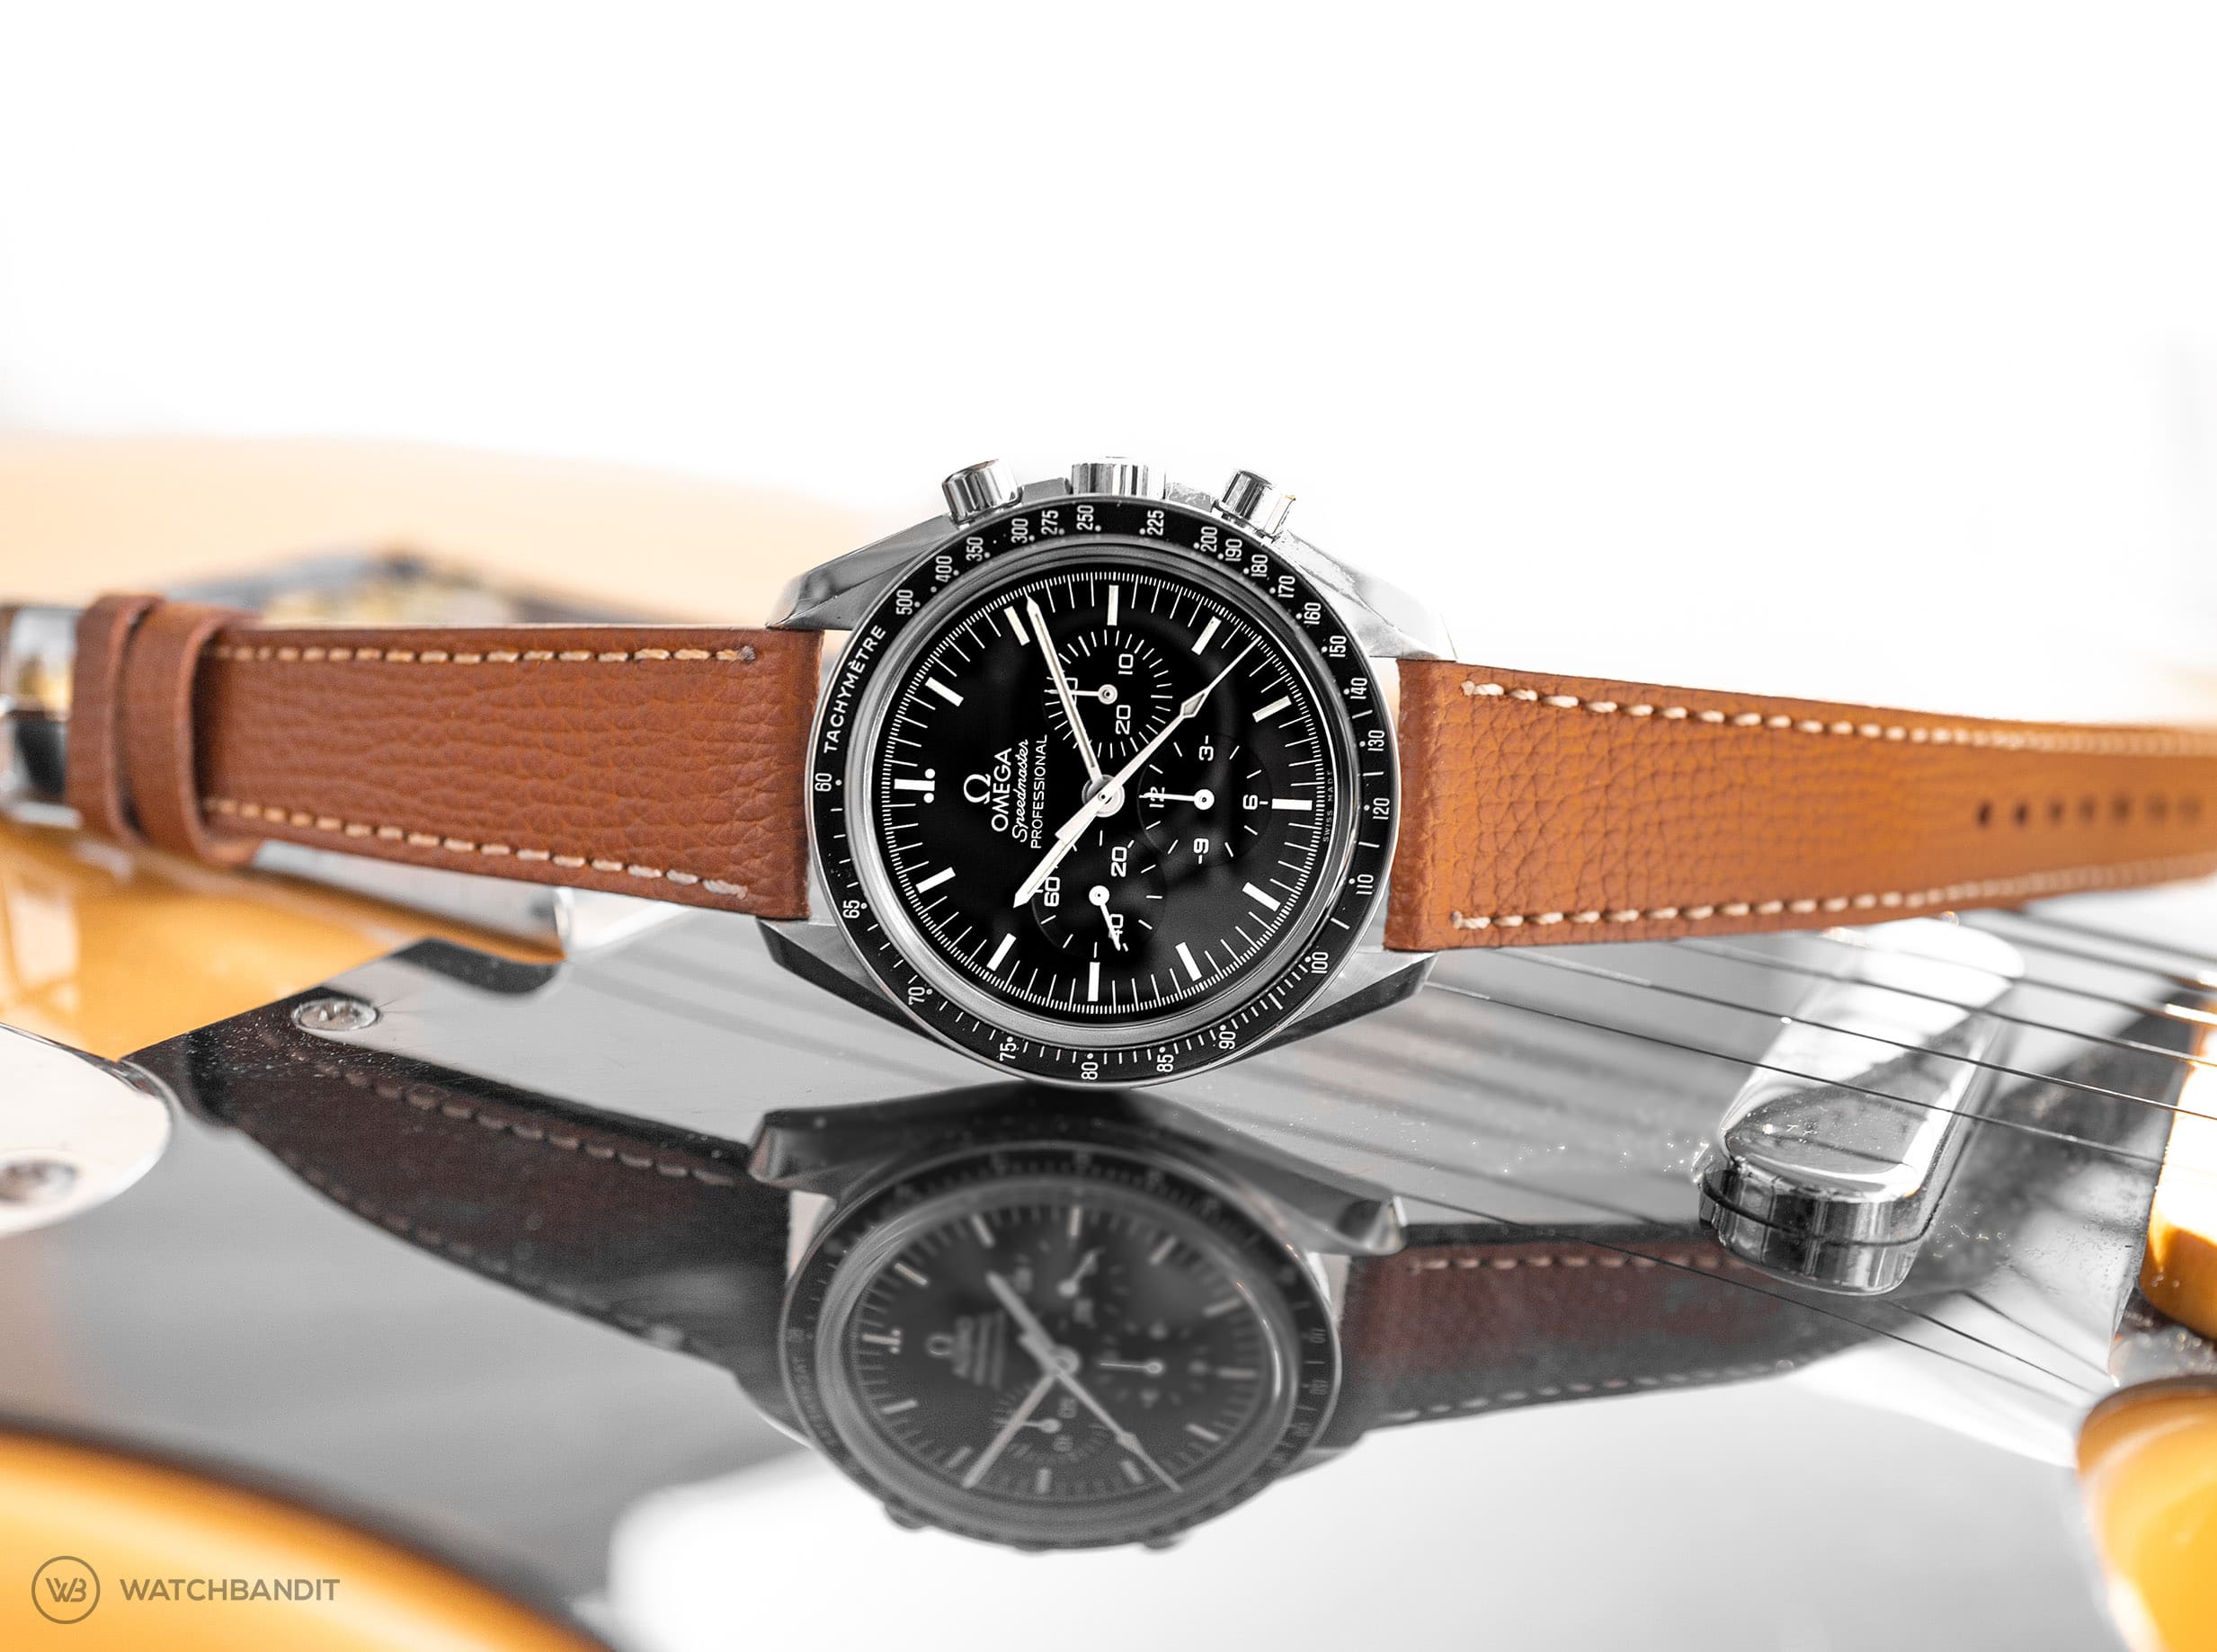 Omega Speedmaster Professional Strap guide textured calfskin leather strap tanned horizontal-min